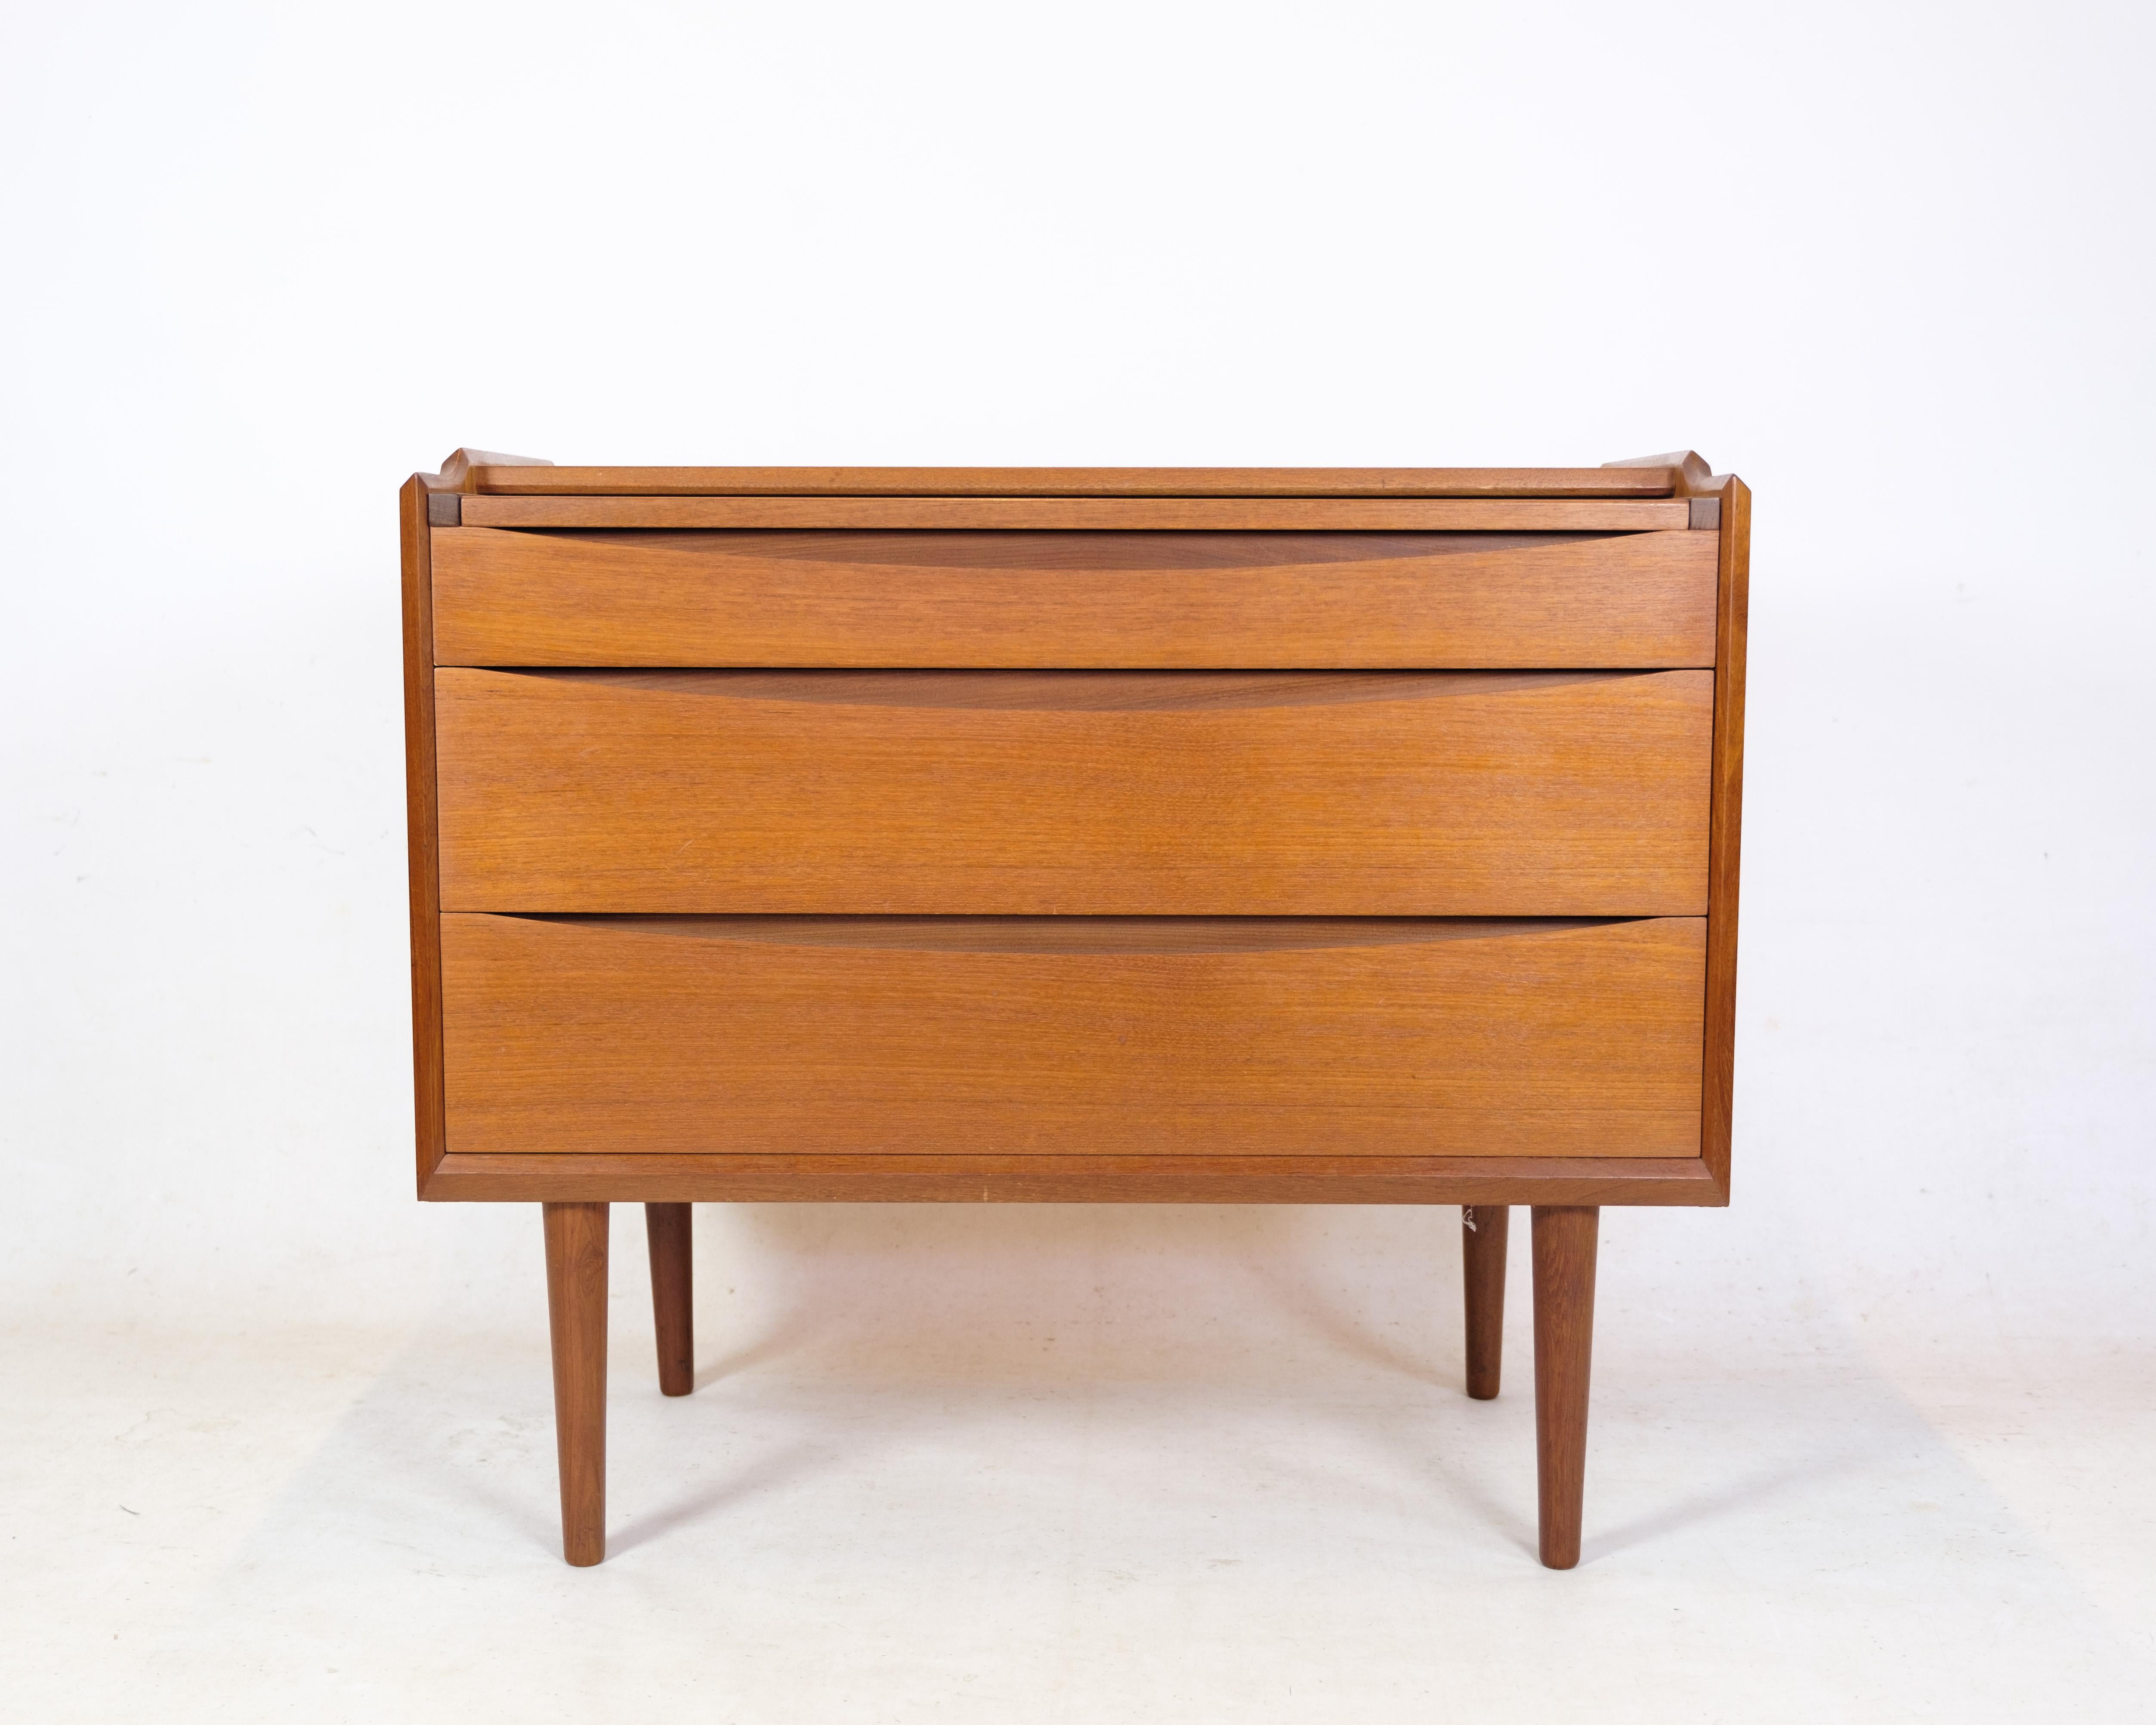 Dressing table veneered with teak wood, front with fold-up mirror panel, including two drawers. Manufactured at Ølholm Møbelfabrik, stamp from here. The 1960s. H. 80 W. 86 D. 46 cm